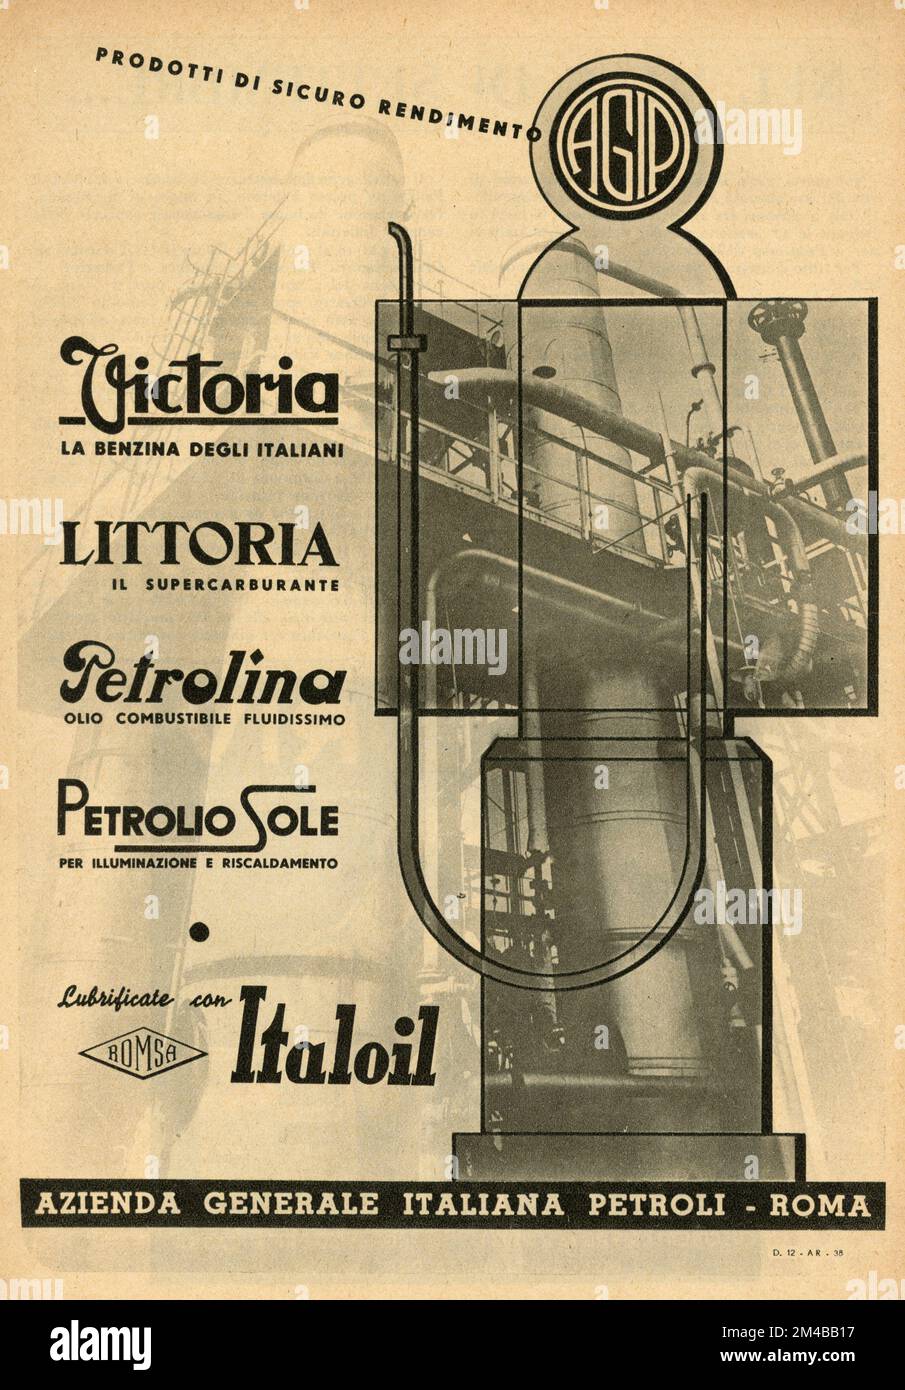 Vintage newspaper ad of AGIP gasolines, Italy 1930s Stock Photo